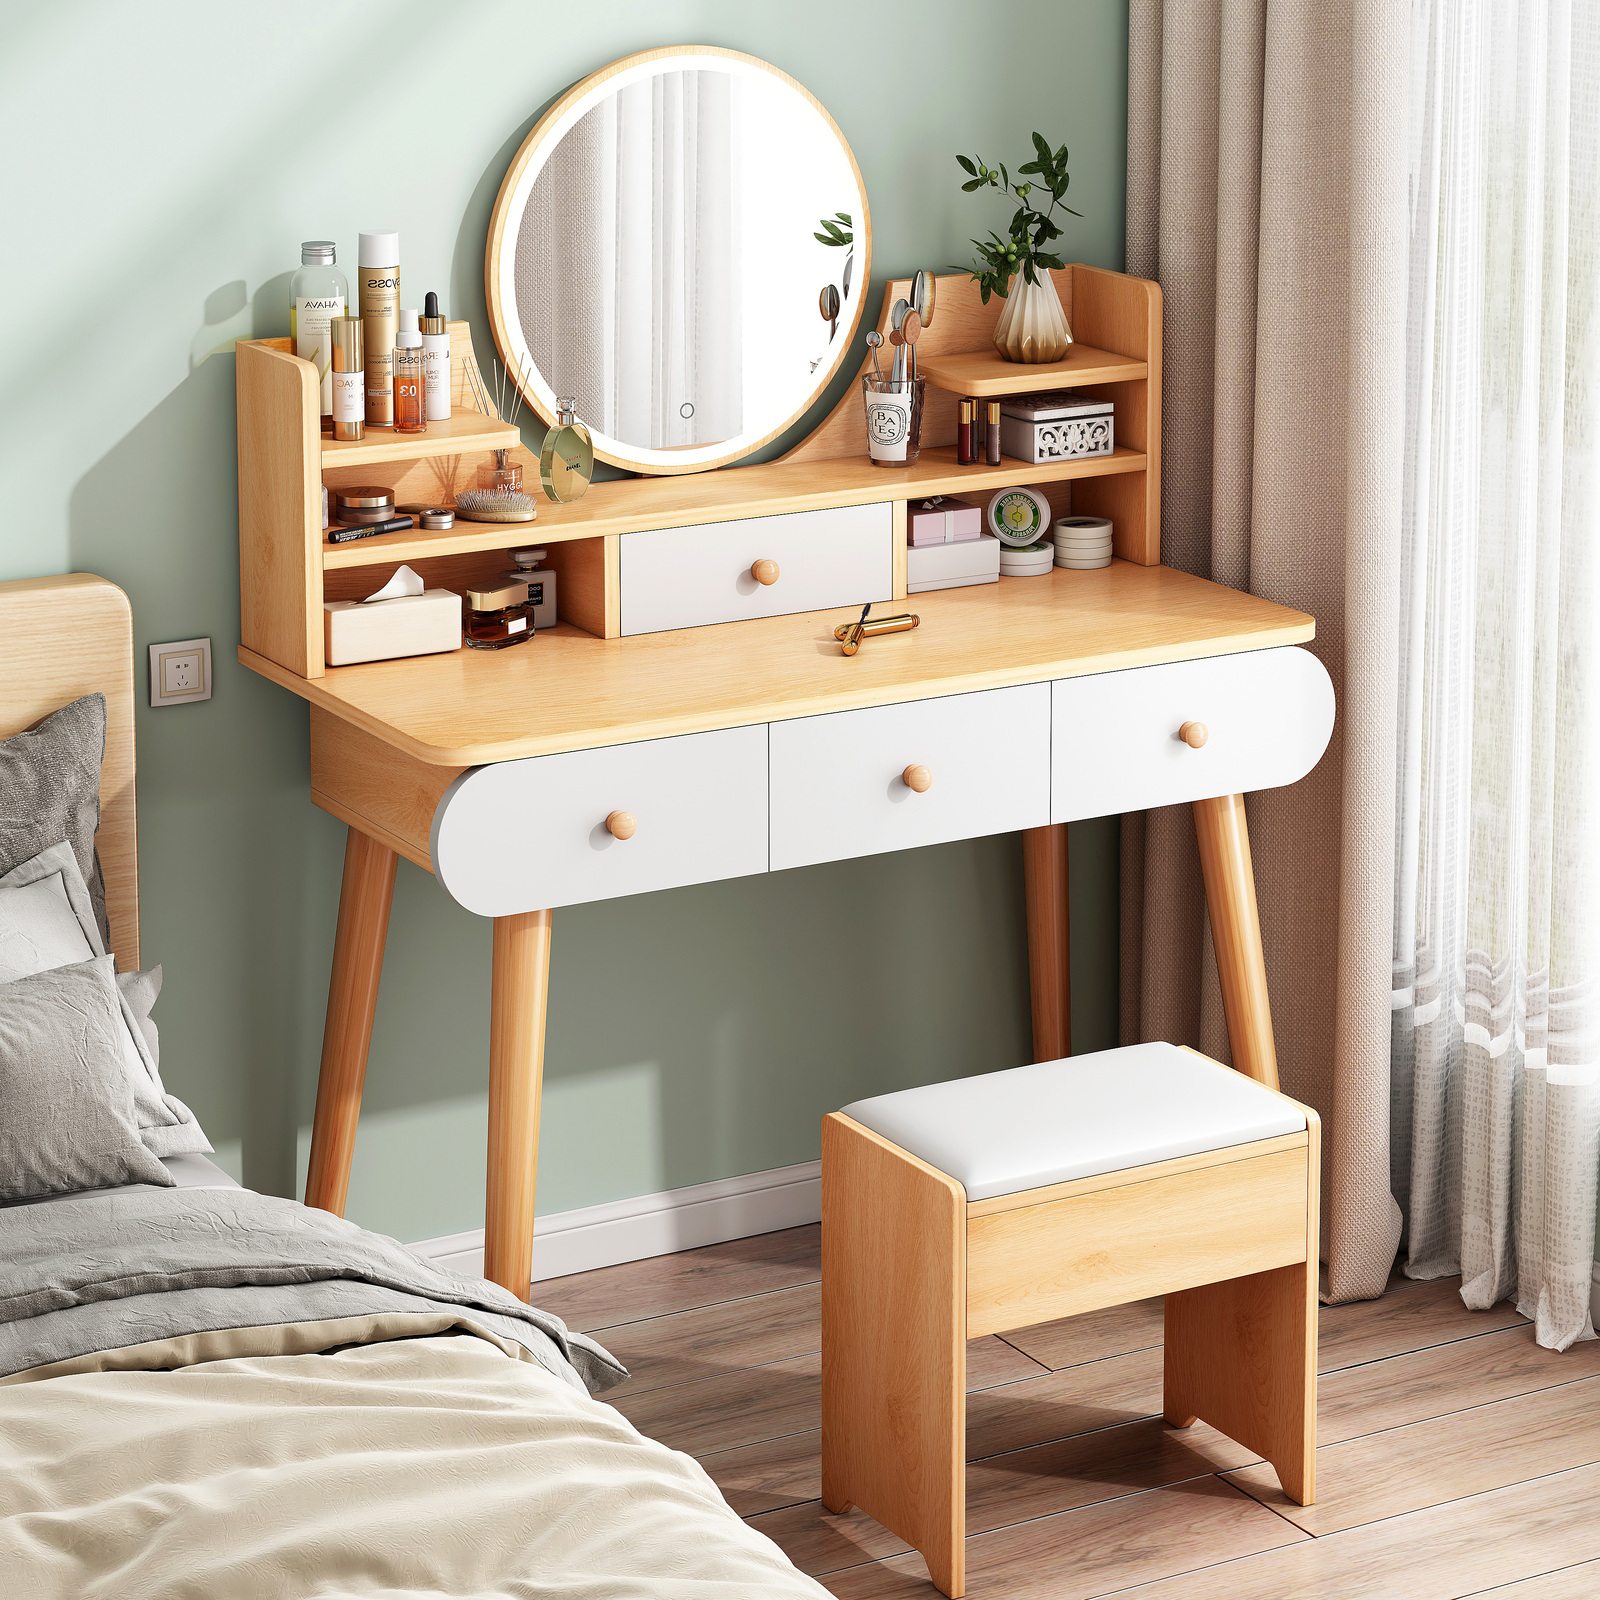 Beauty Dresser Vanity Table with Mirror, Stool and Storage Drawers